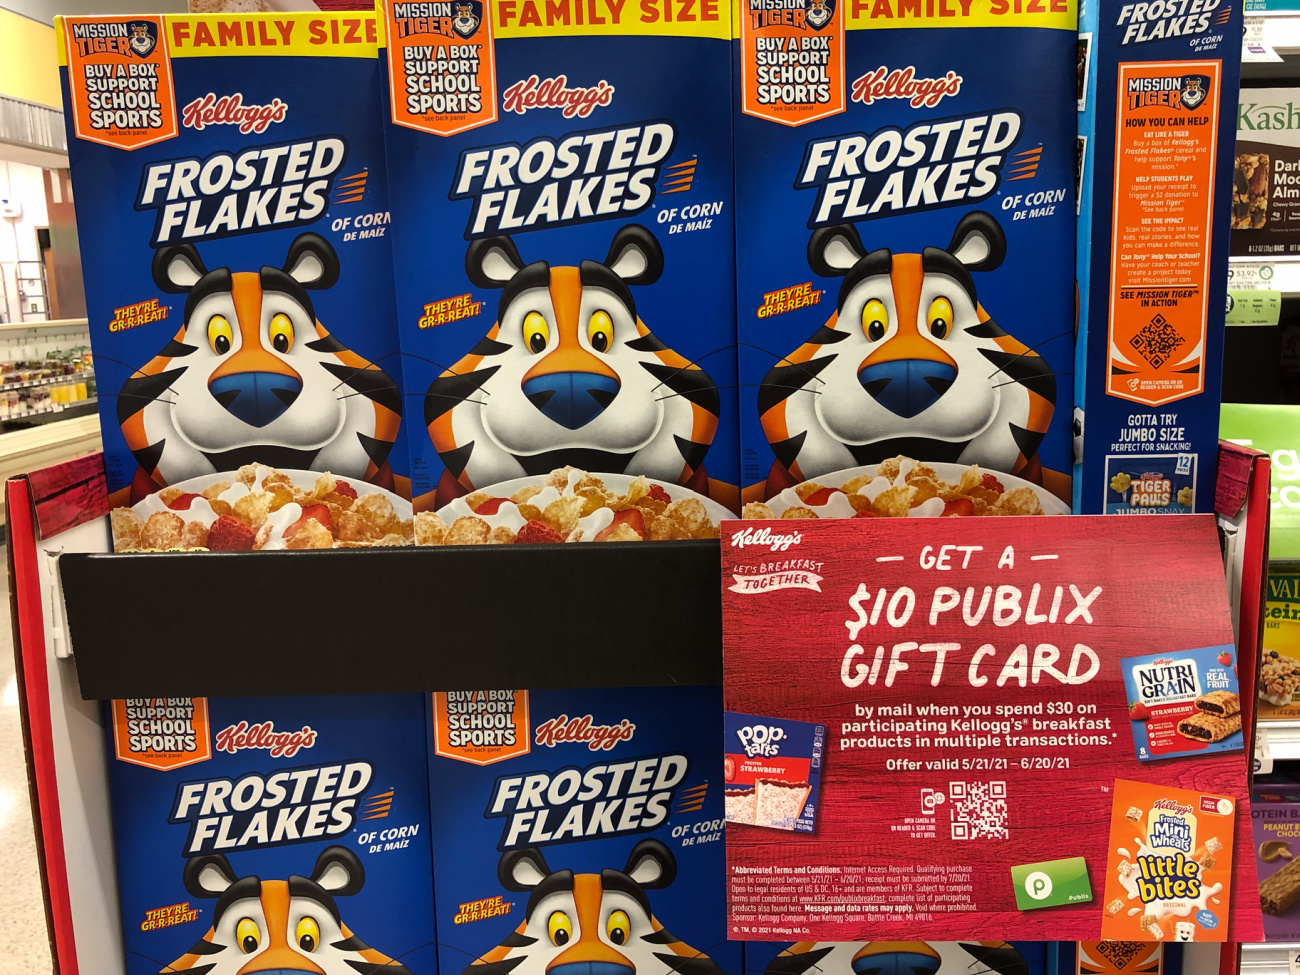 Don’t Miss Your Chance To Get A $10 Publix Gift Card When You Purchase Your Favorite Kellogg’s® Breakfast Products At Publix